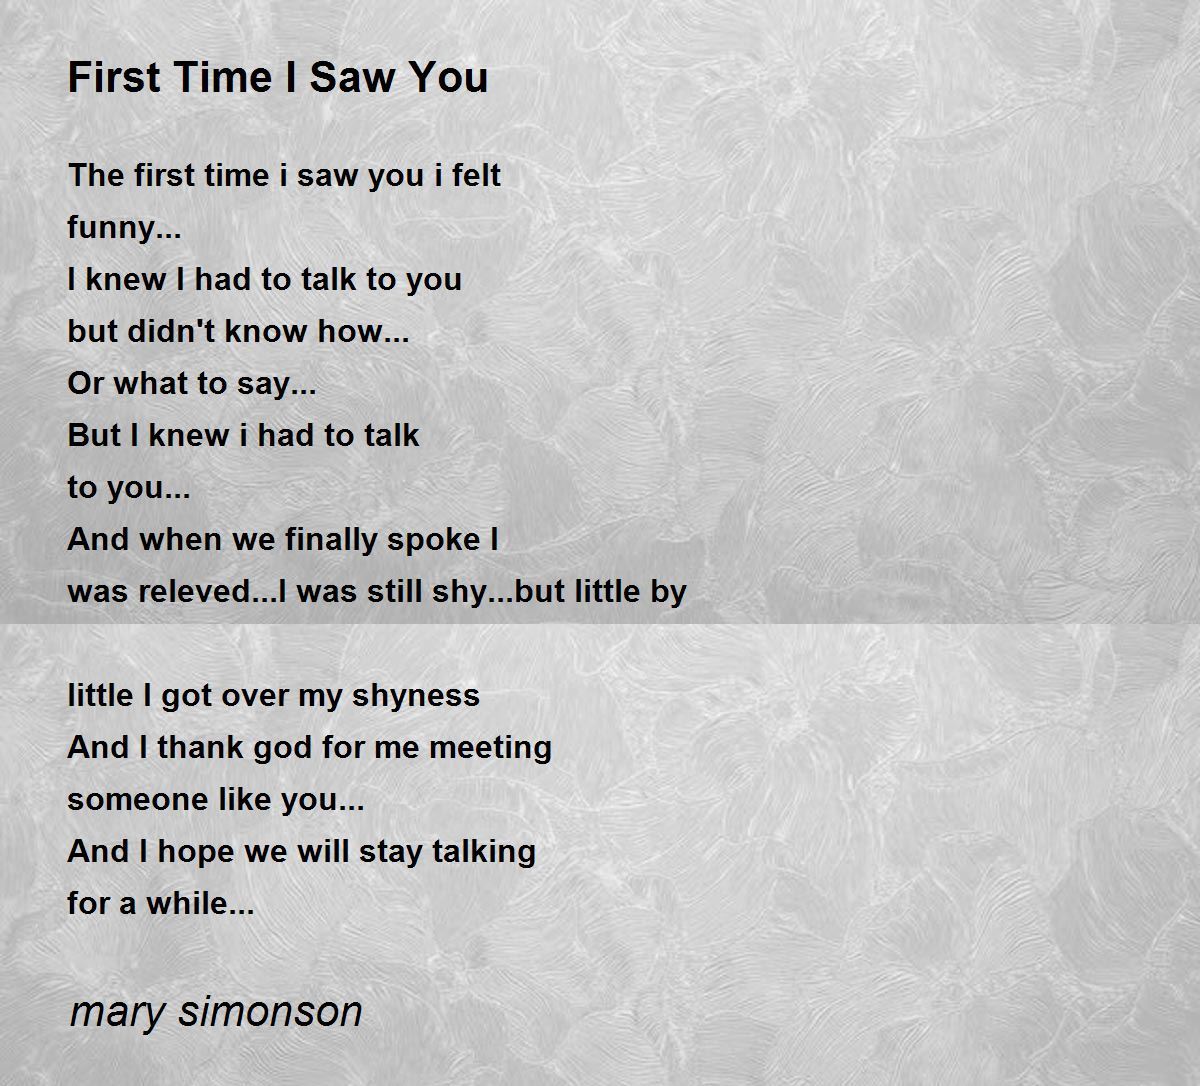 Poem when you i saw First Love,